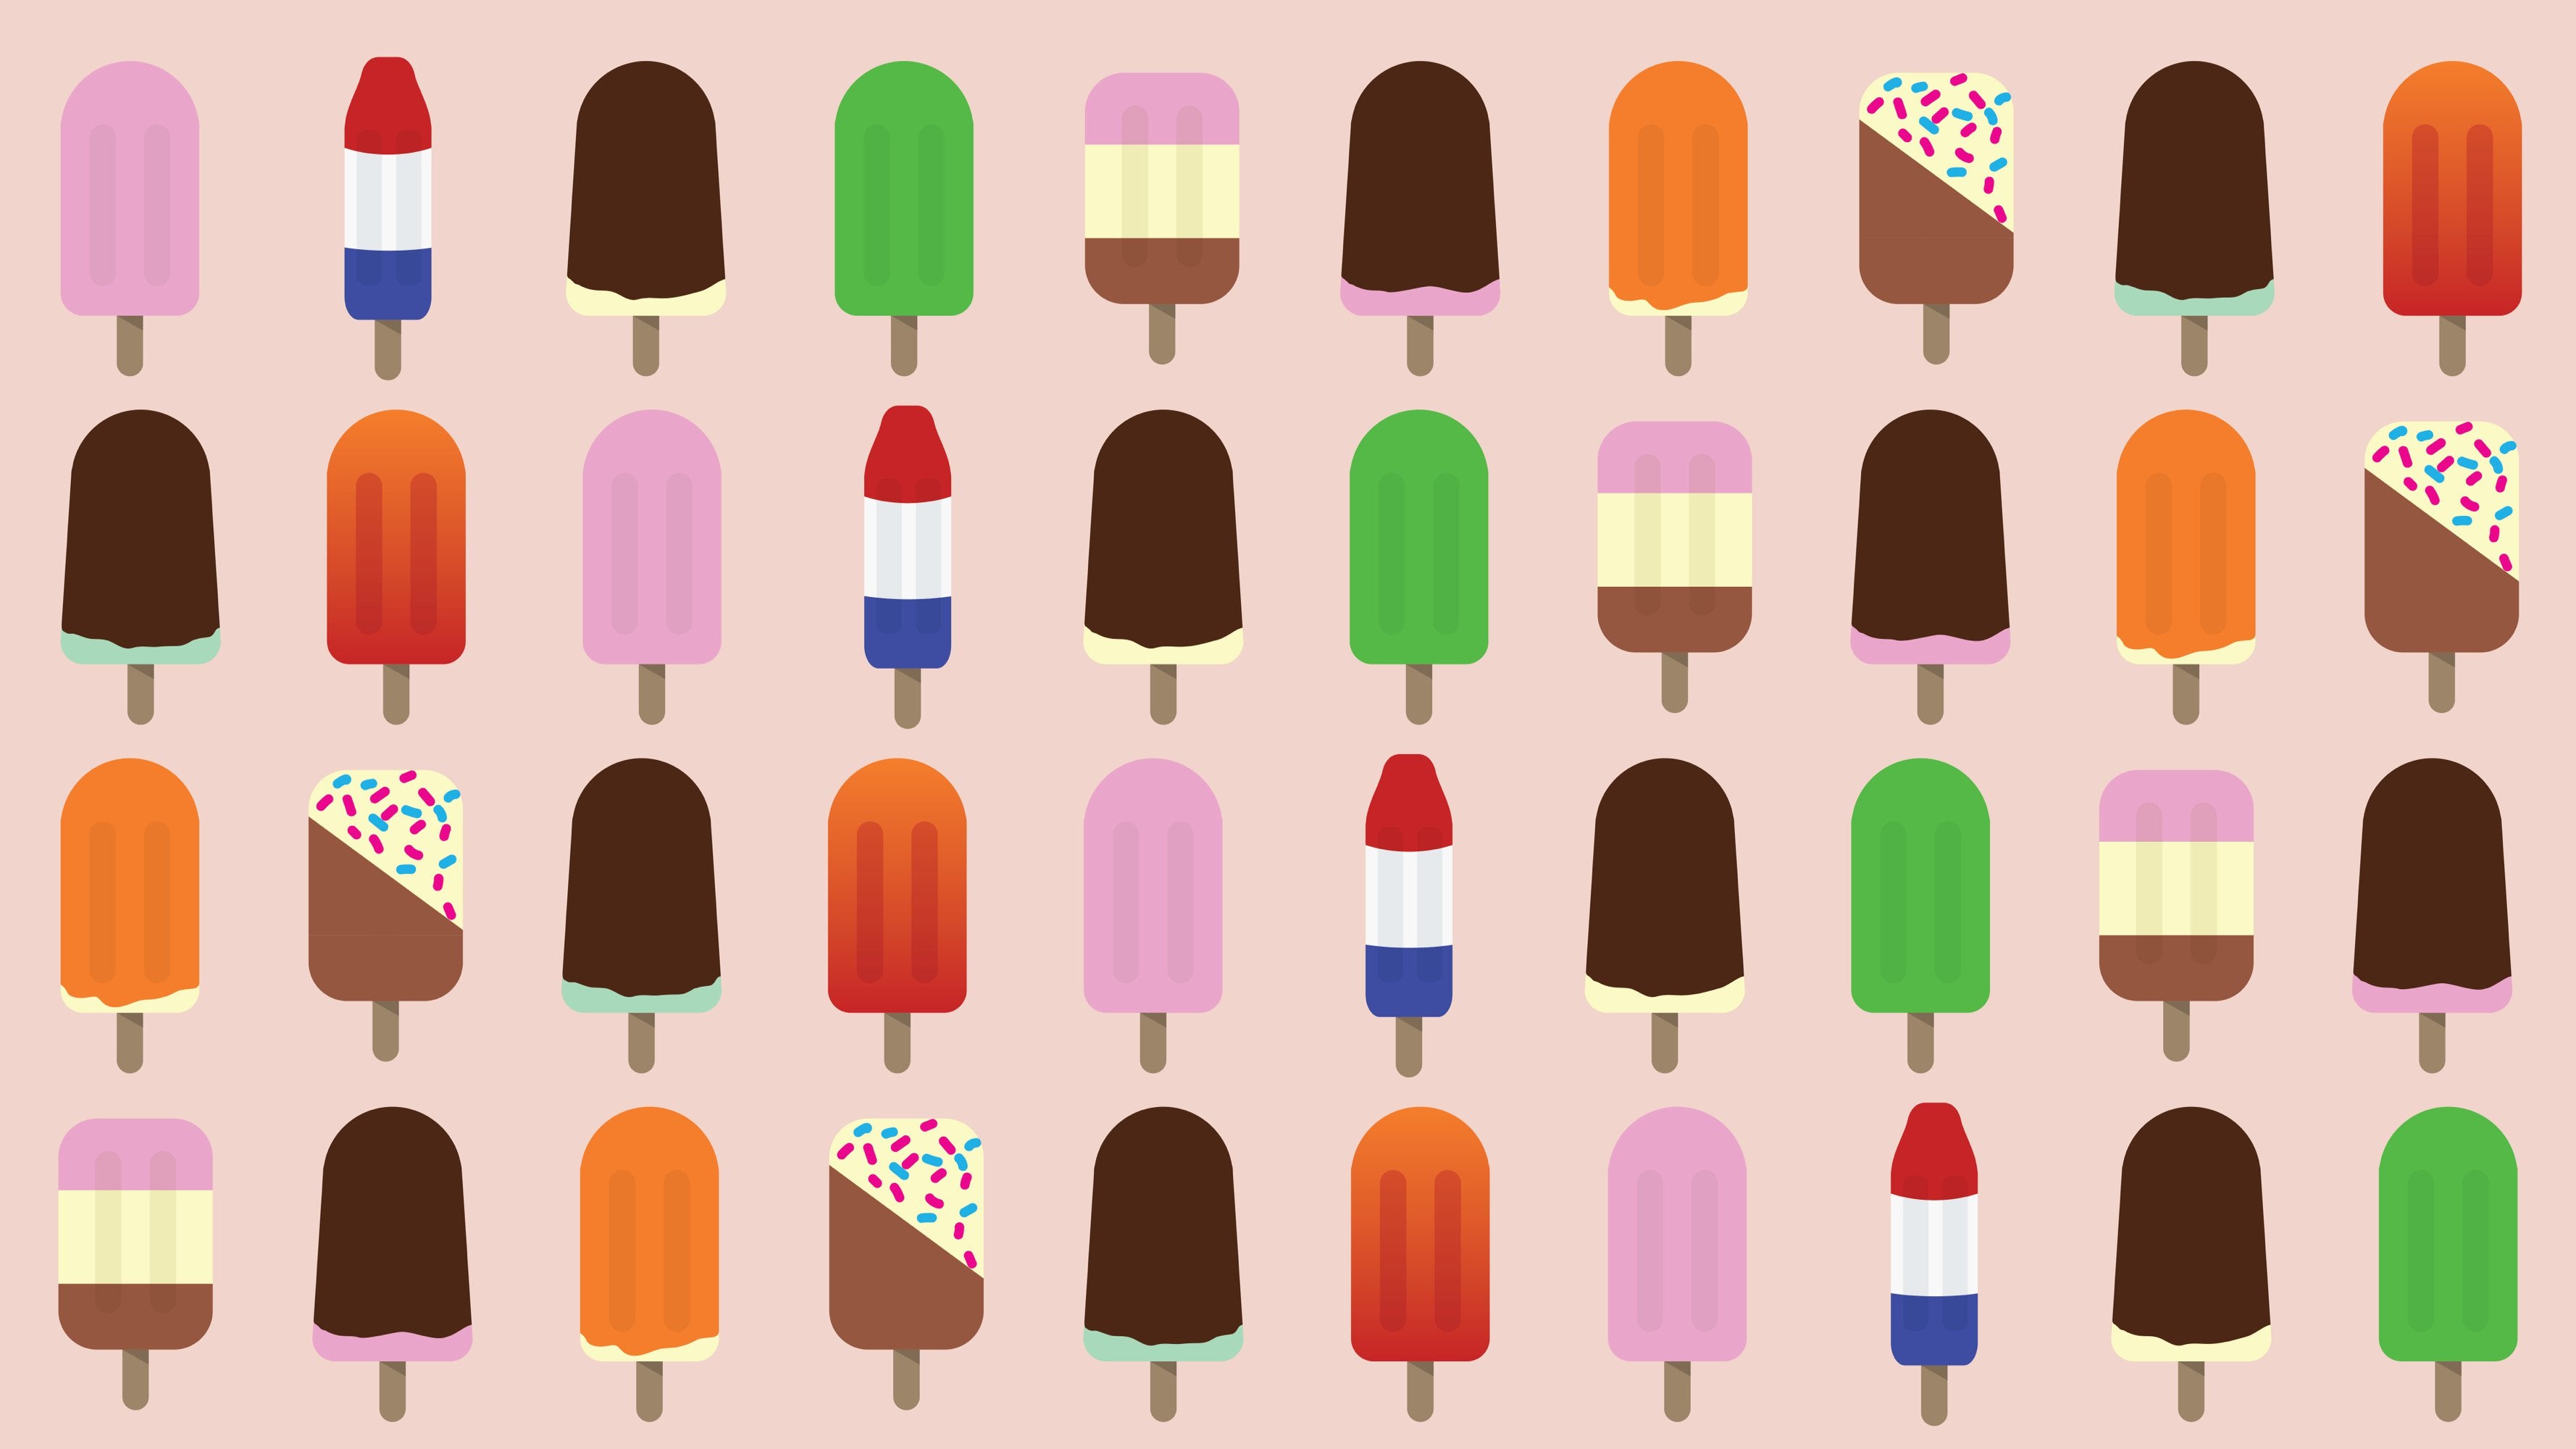 Popsicles - Colorful ice lolly background